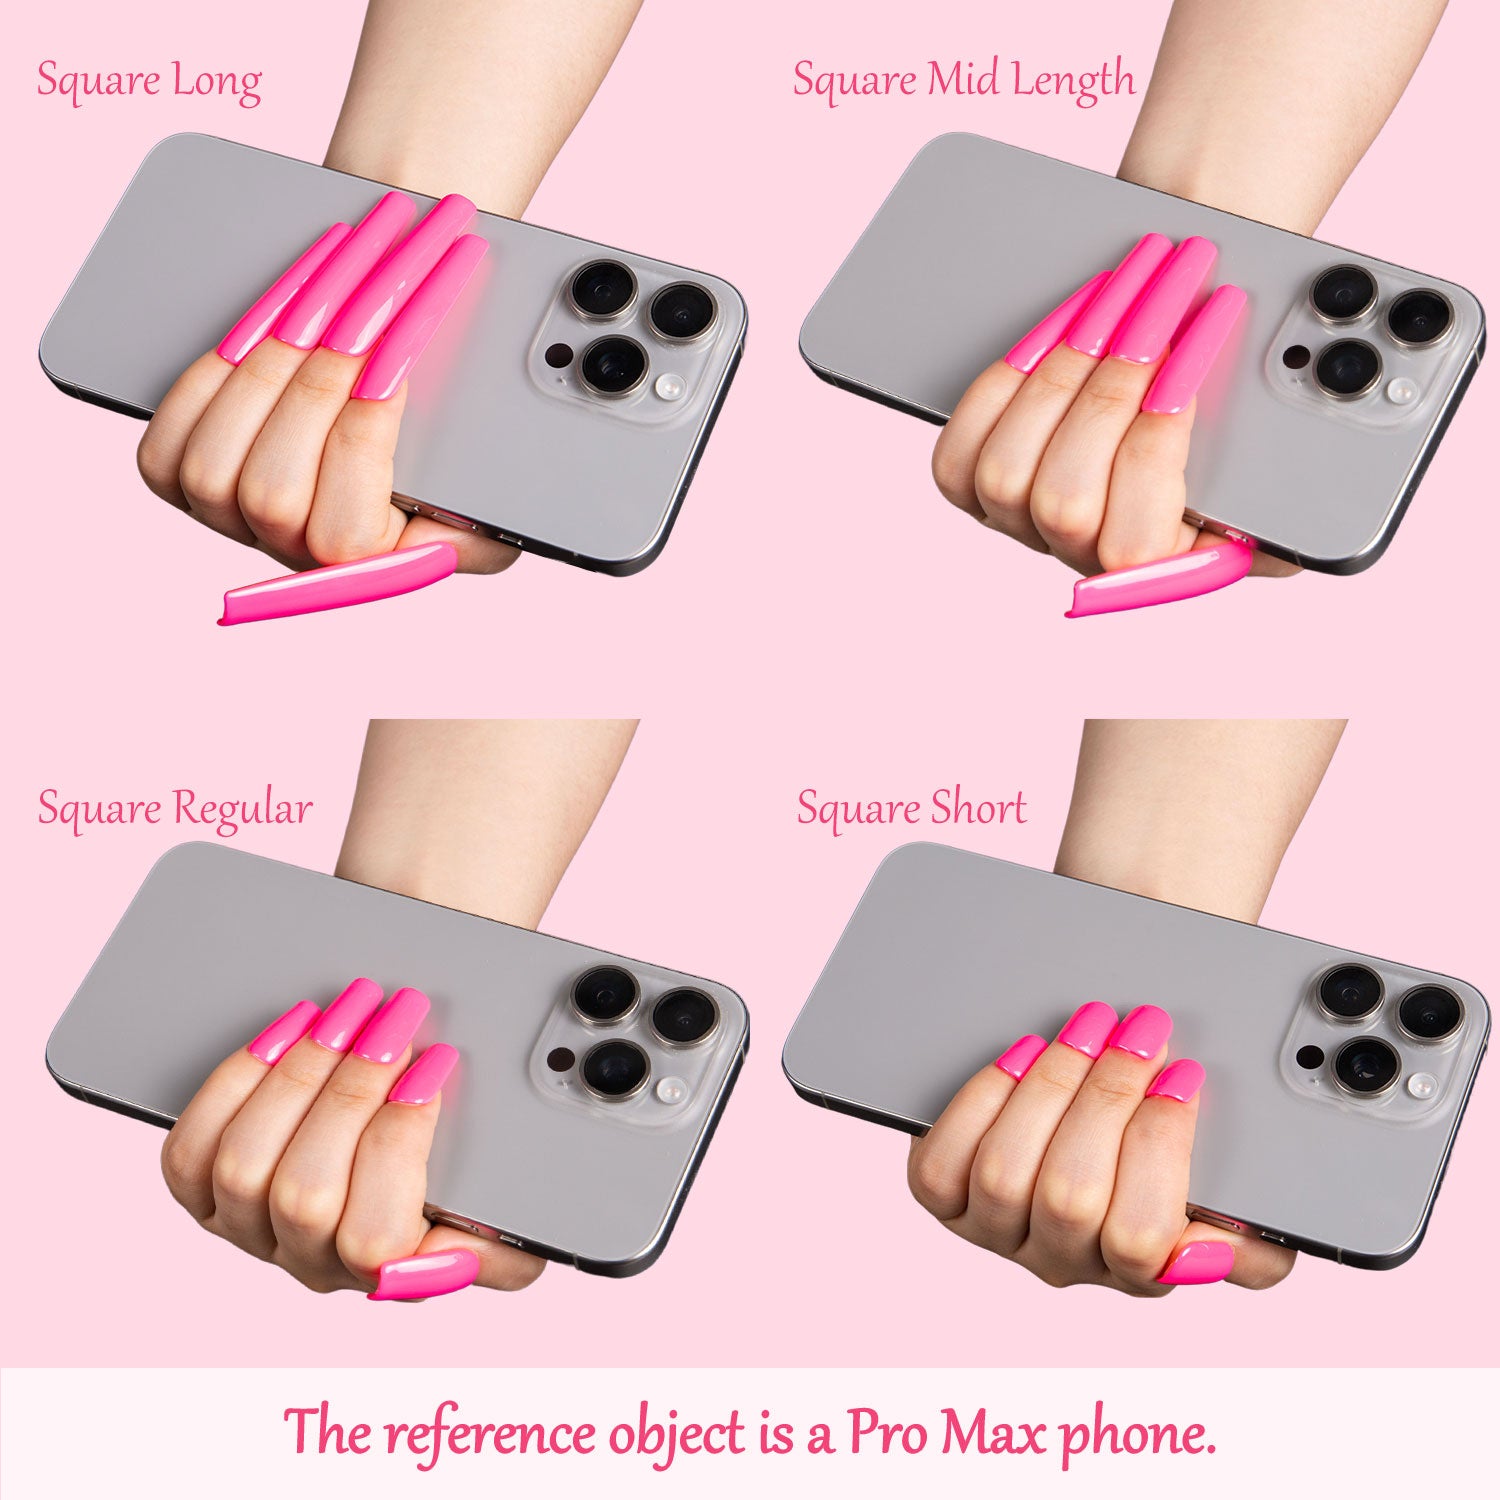 Comparison of four square-shaped pink press-on nail lengths, from long to short, with an iPhone Pro Max as reference.